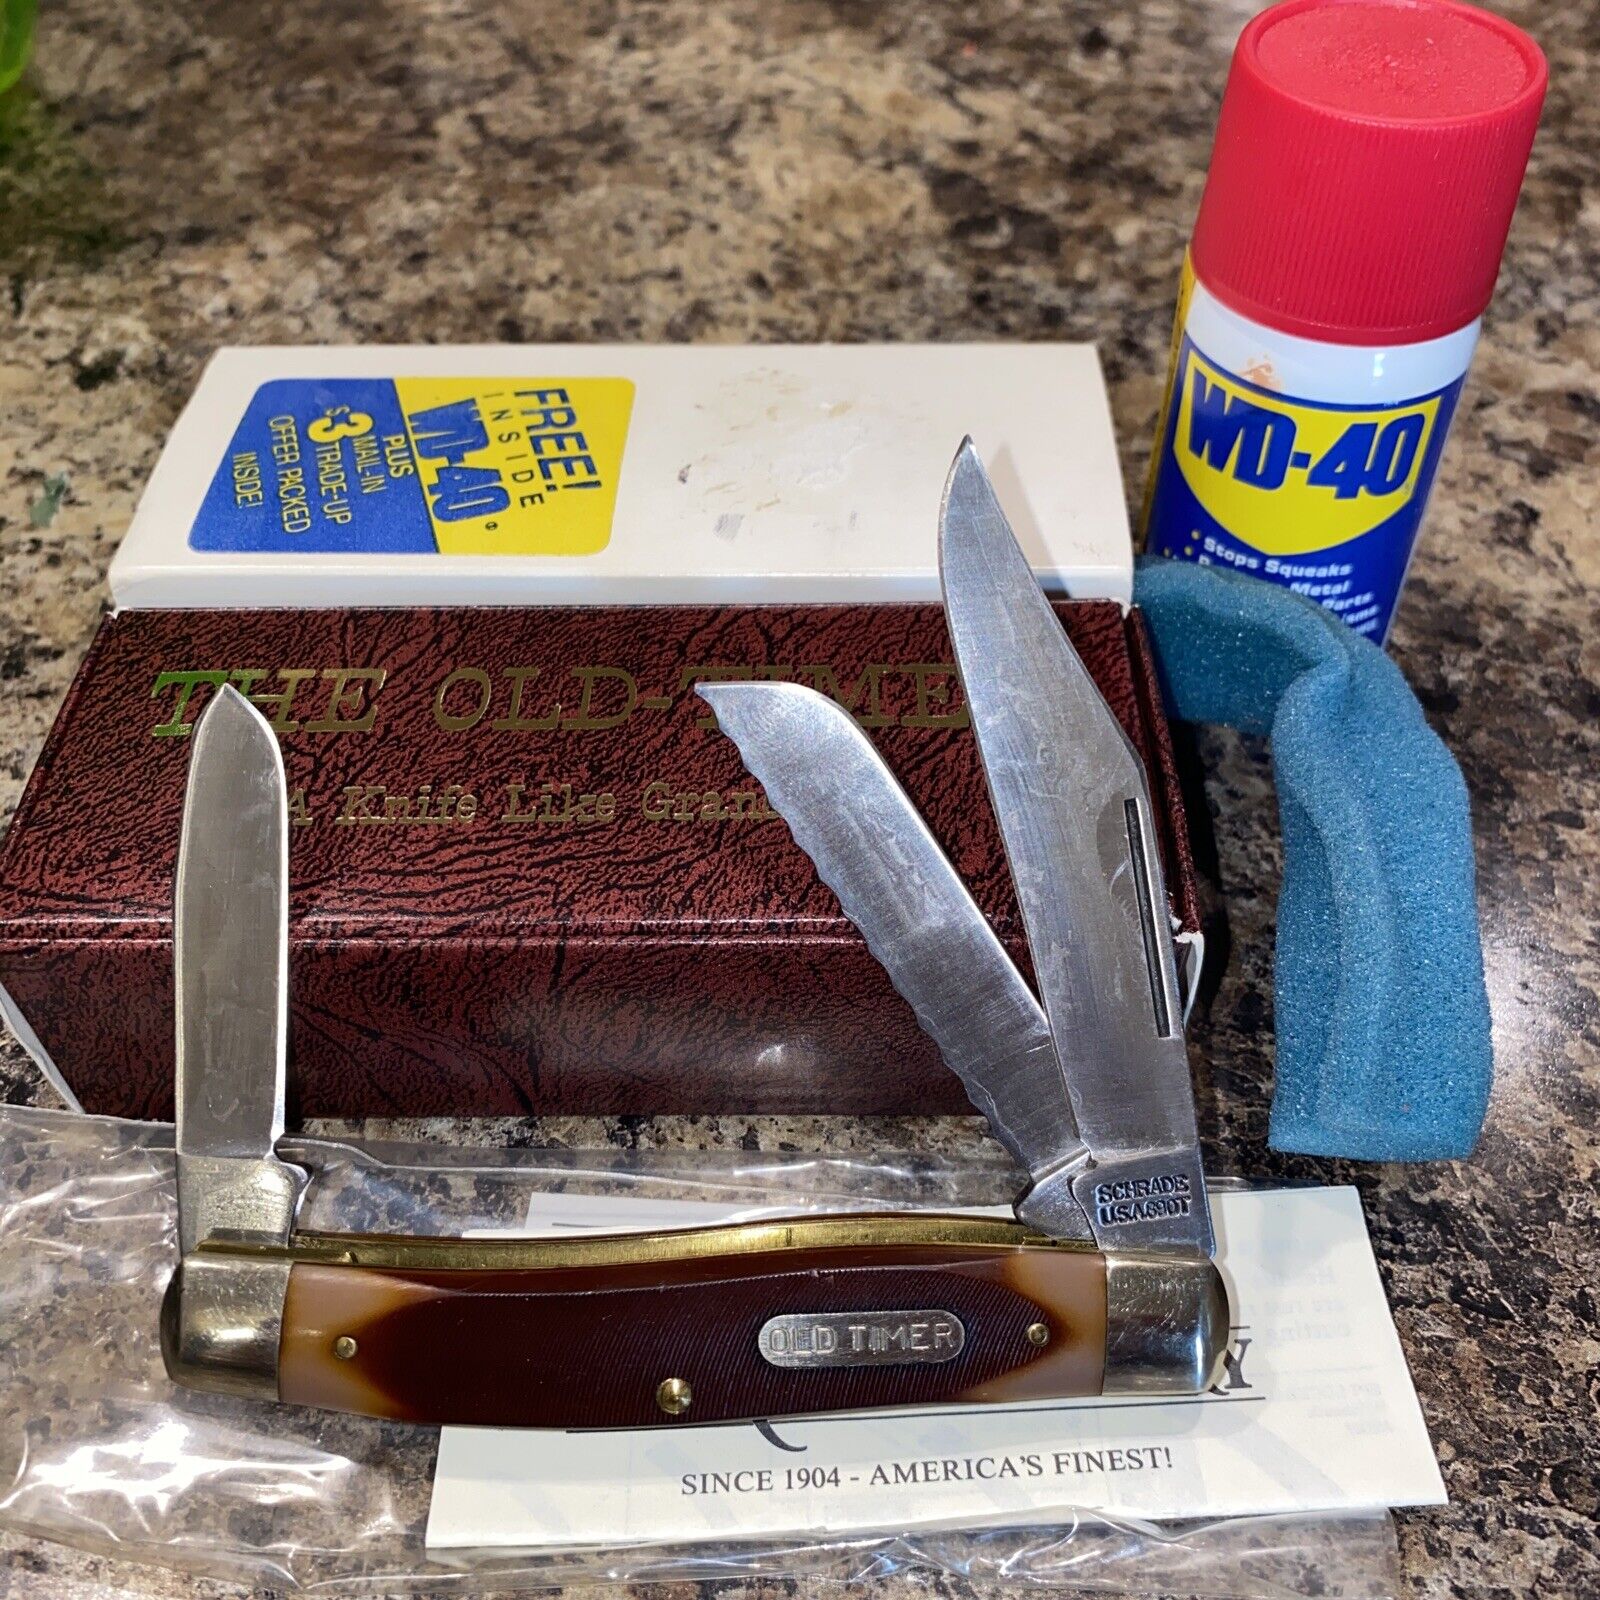 Schrade USA 89OT Old Timer WD-40 Knife Rare New In Box Complete Kit NOS